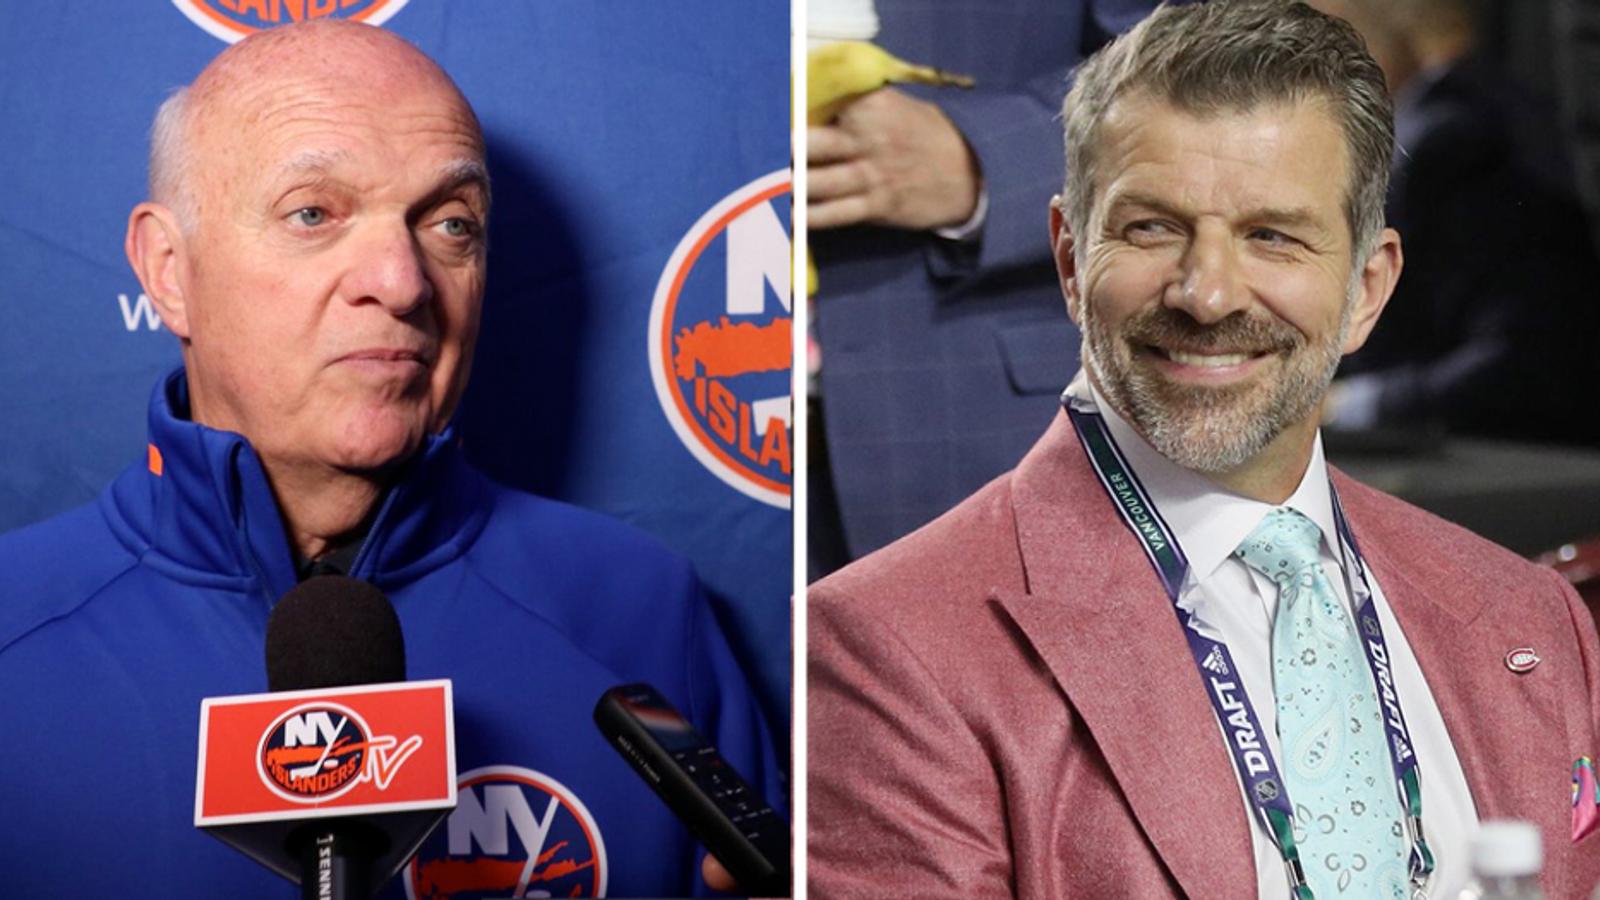 Bergevin and Lamoriello considered favorites as NHL releases nominees for GM of the year